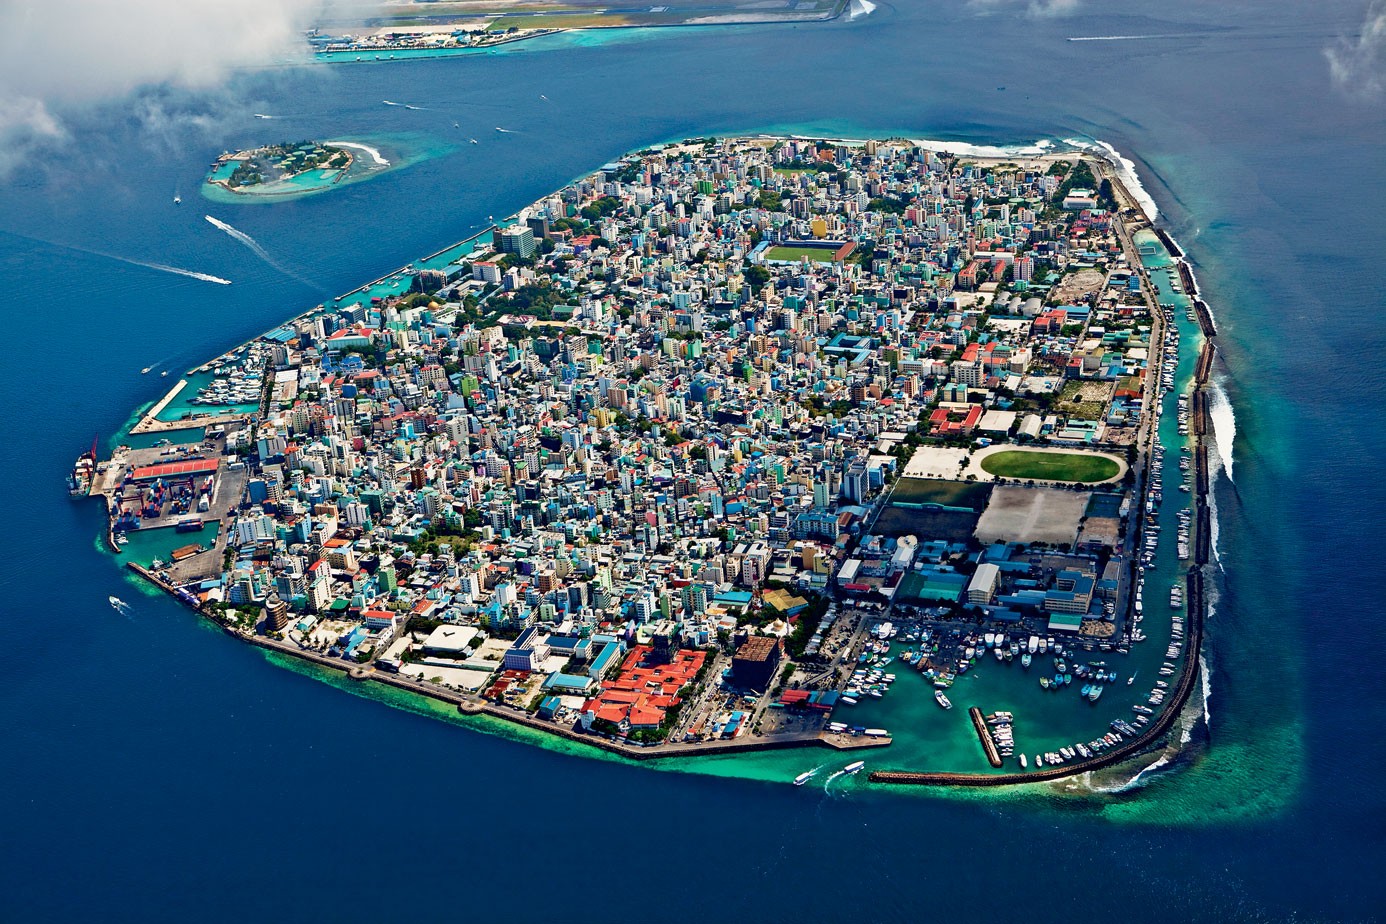 architecture, Urban, City, Town, Maldives, Island, Aerial view, Sea, Ship, Boat, Rooftops, Clouds, House, Bay, Harbor, Stadium Wallpaper